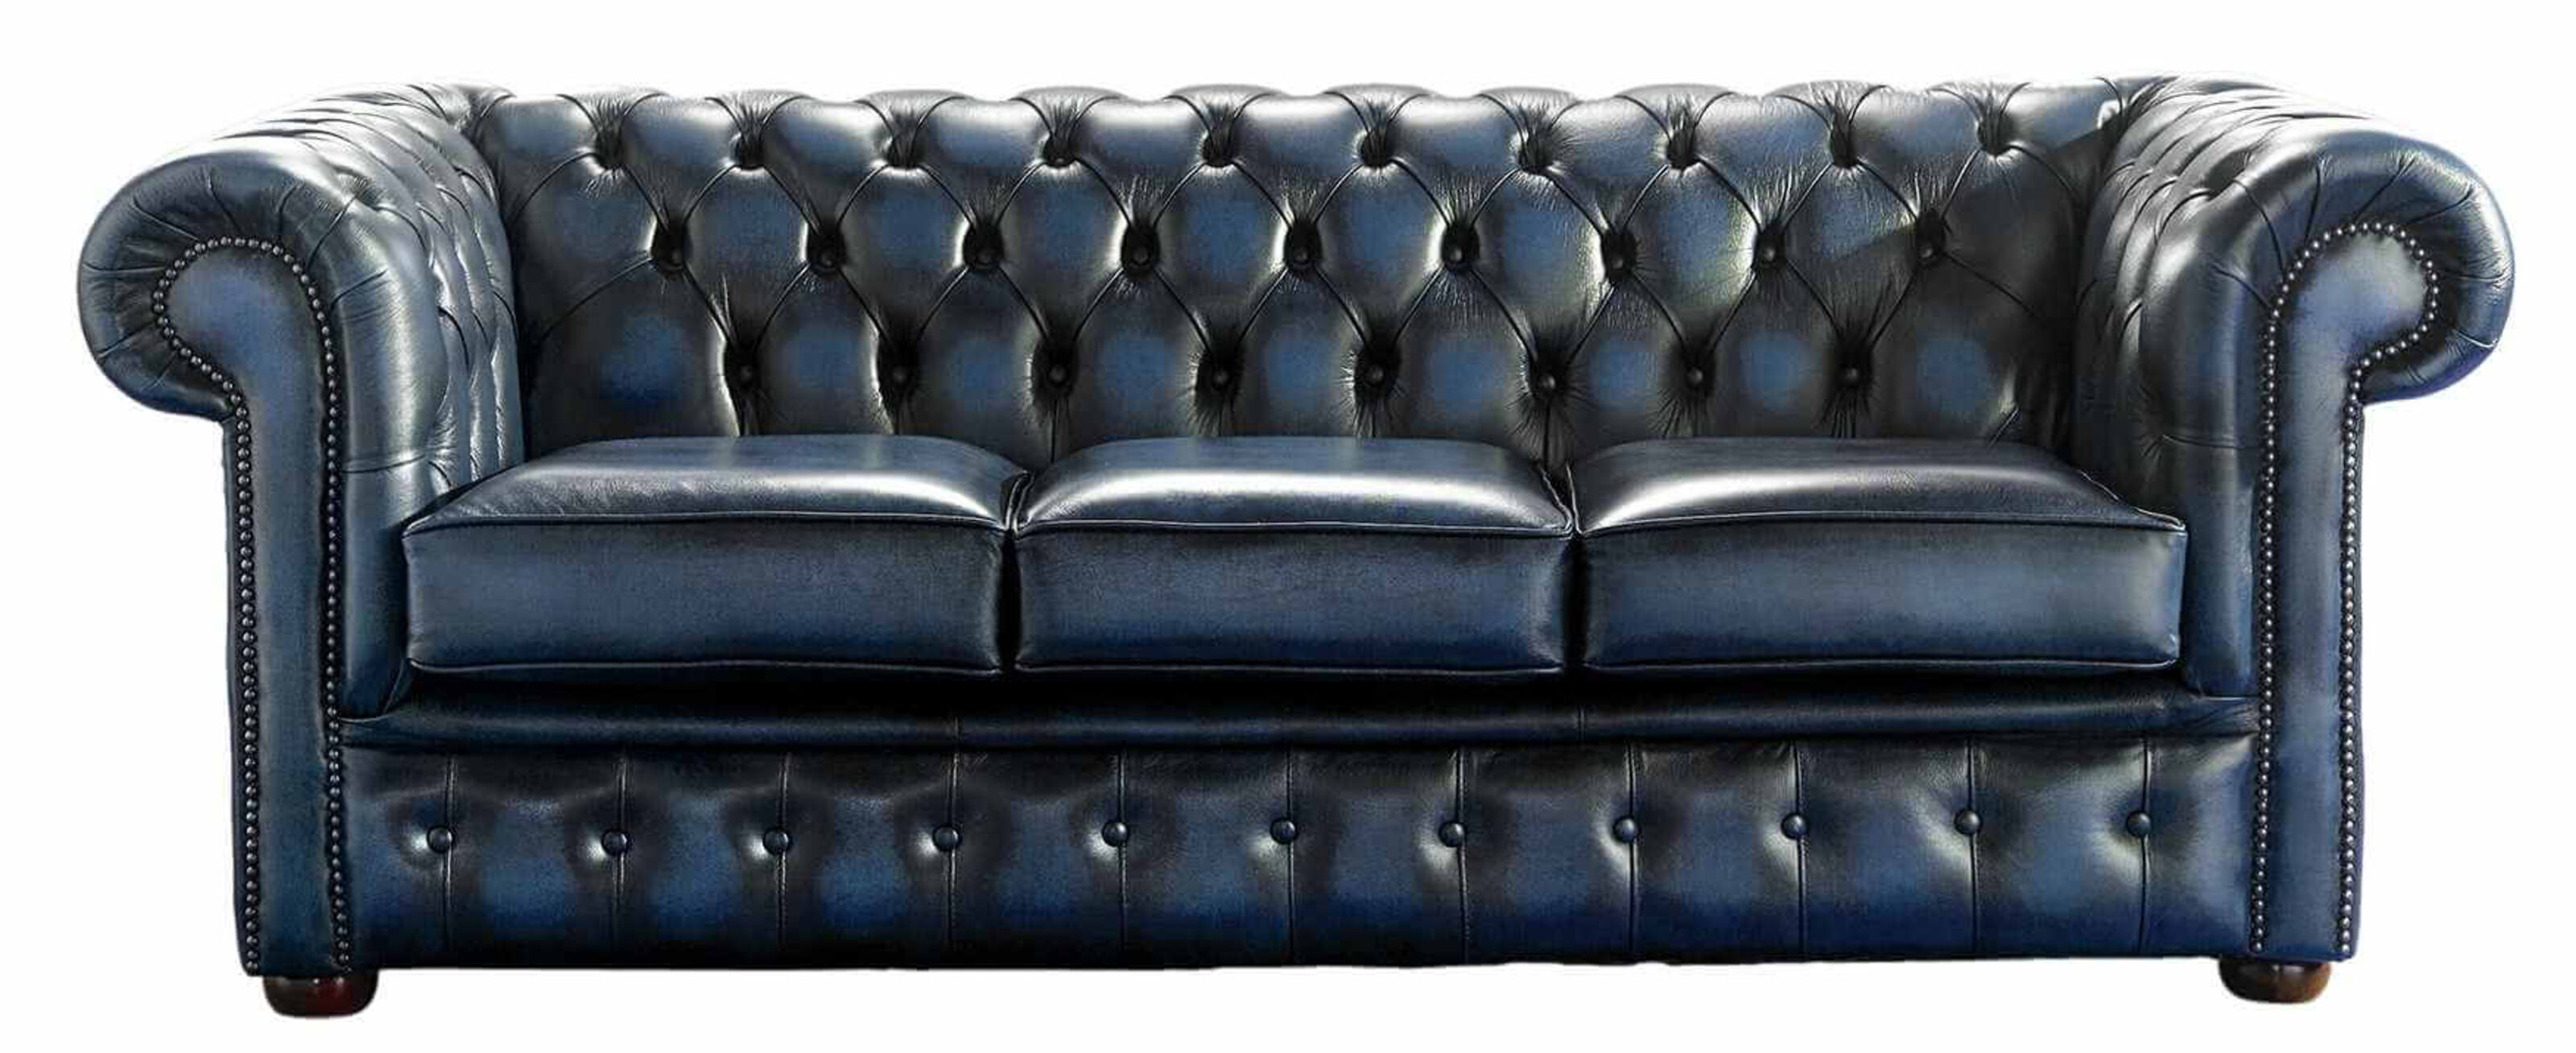 Timeless Charm Stylish Tips for Decorating with Chesterfield Sofas  %Post Title